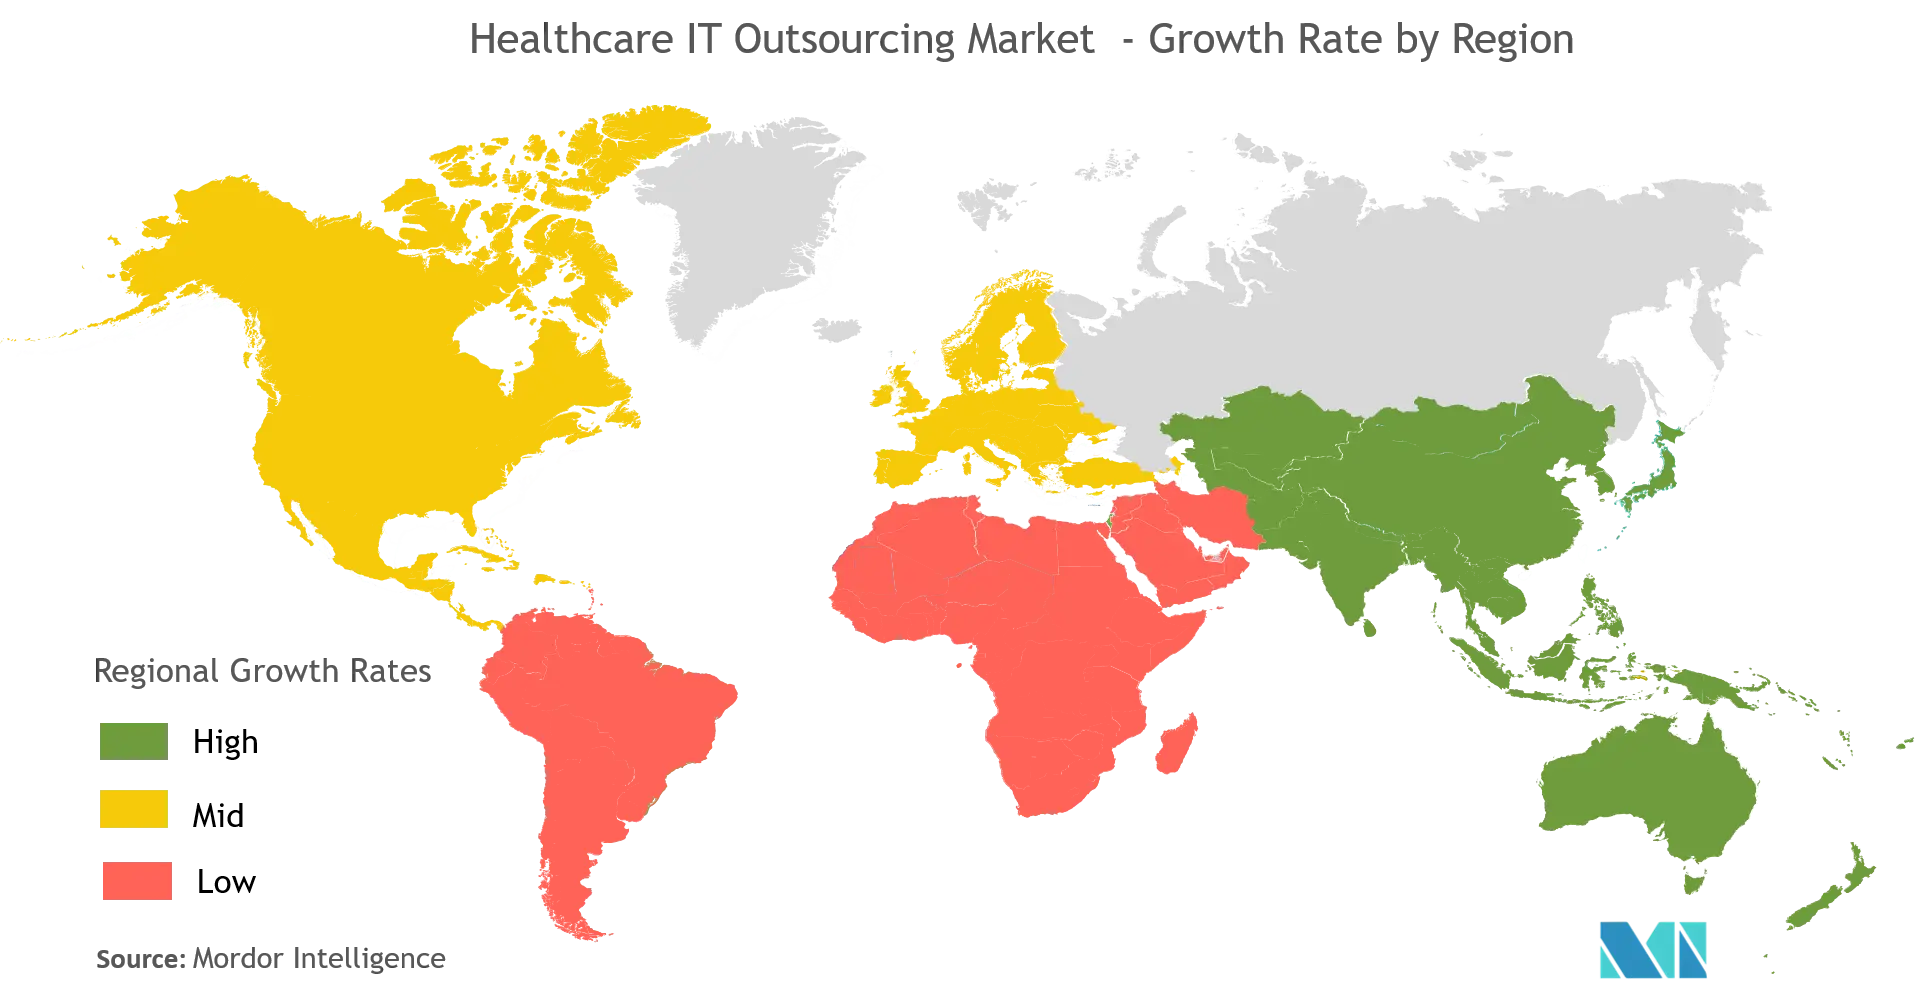 Healthcare IT Outsourcing Market Growth by Region